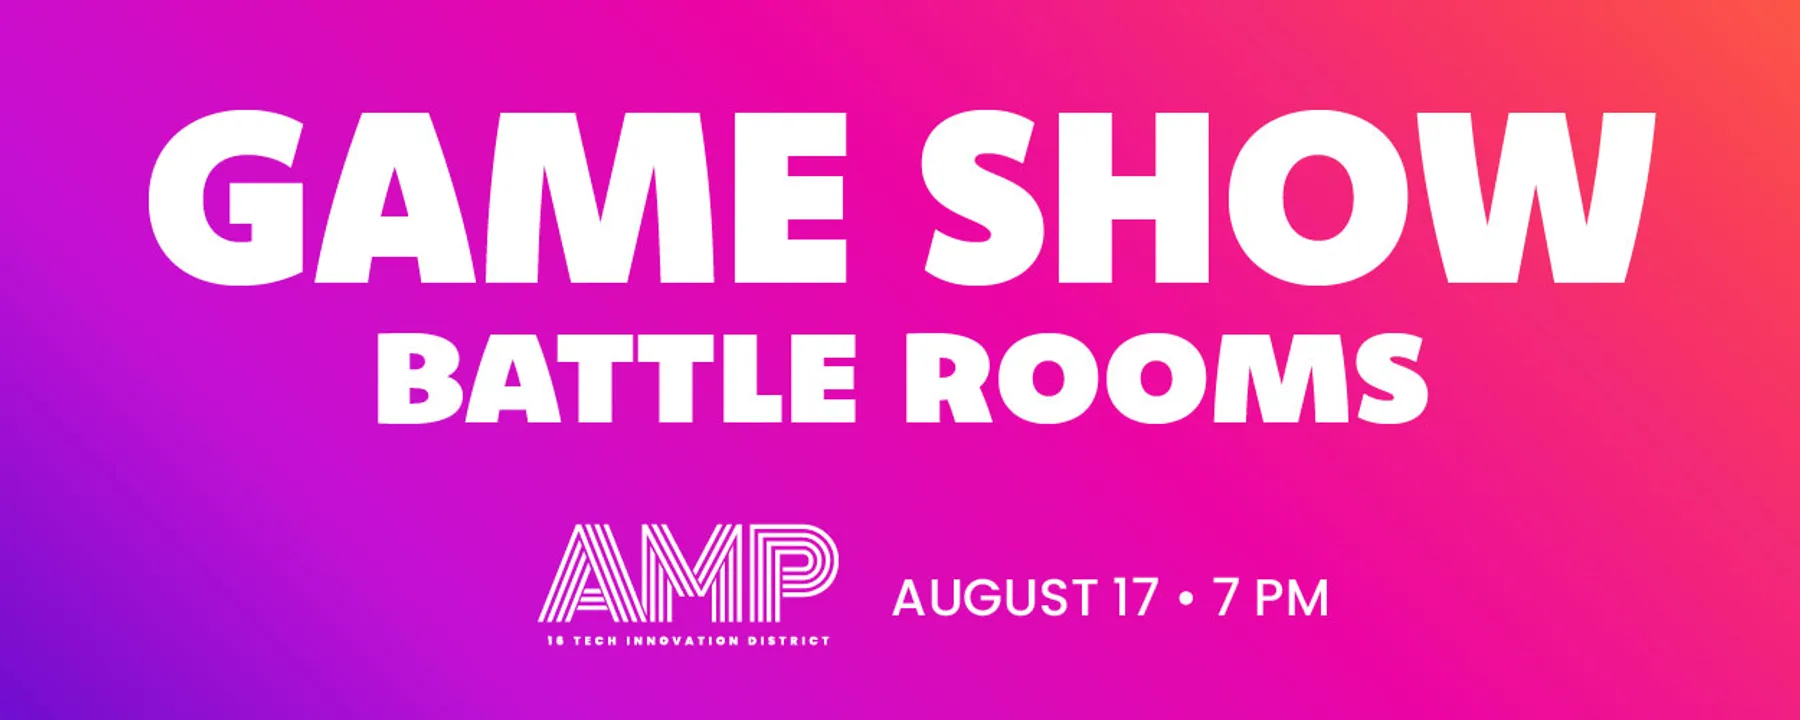 Game Show Battle Rooms at the AMP